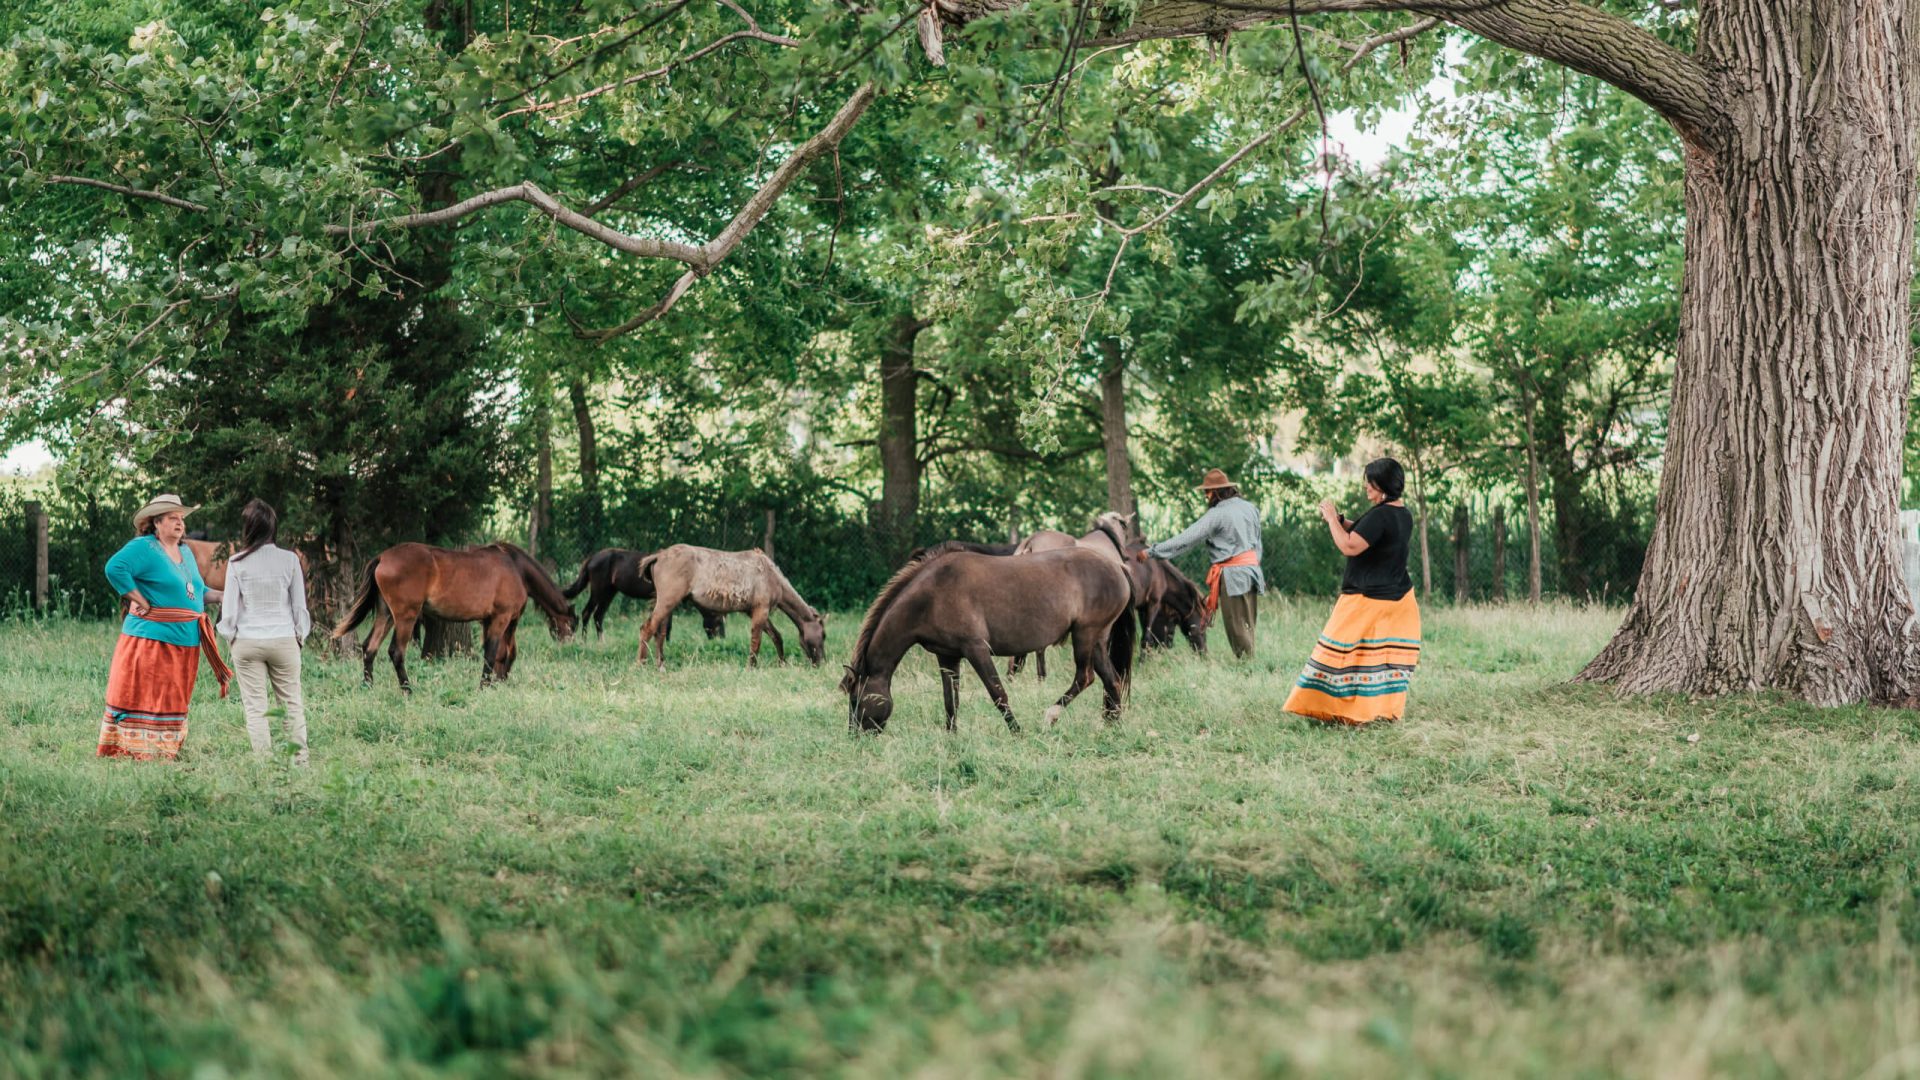 Indigenous people are restoring native horse herds and reaffirming their history